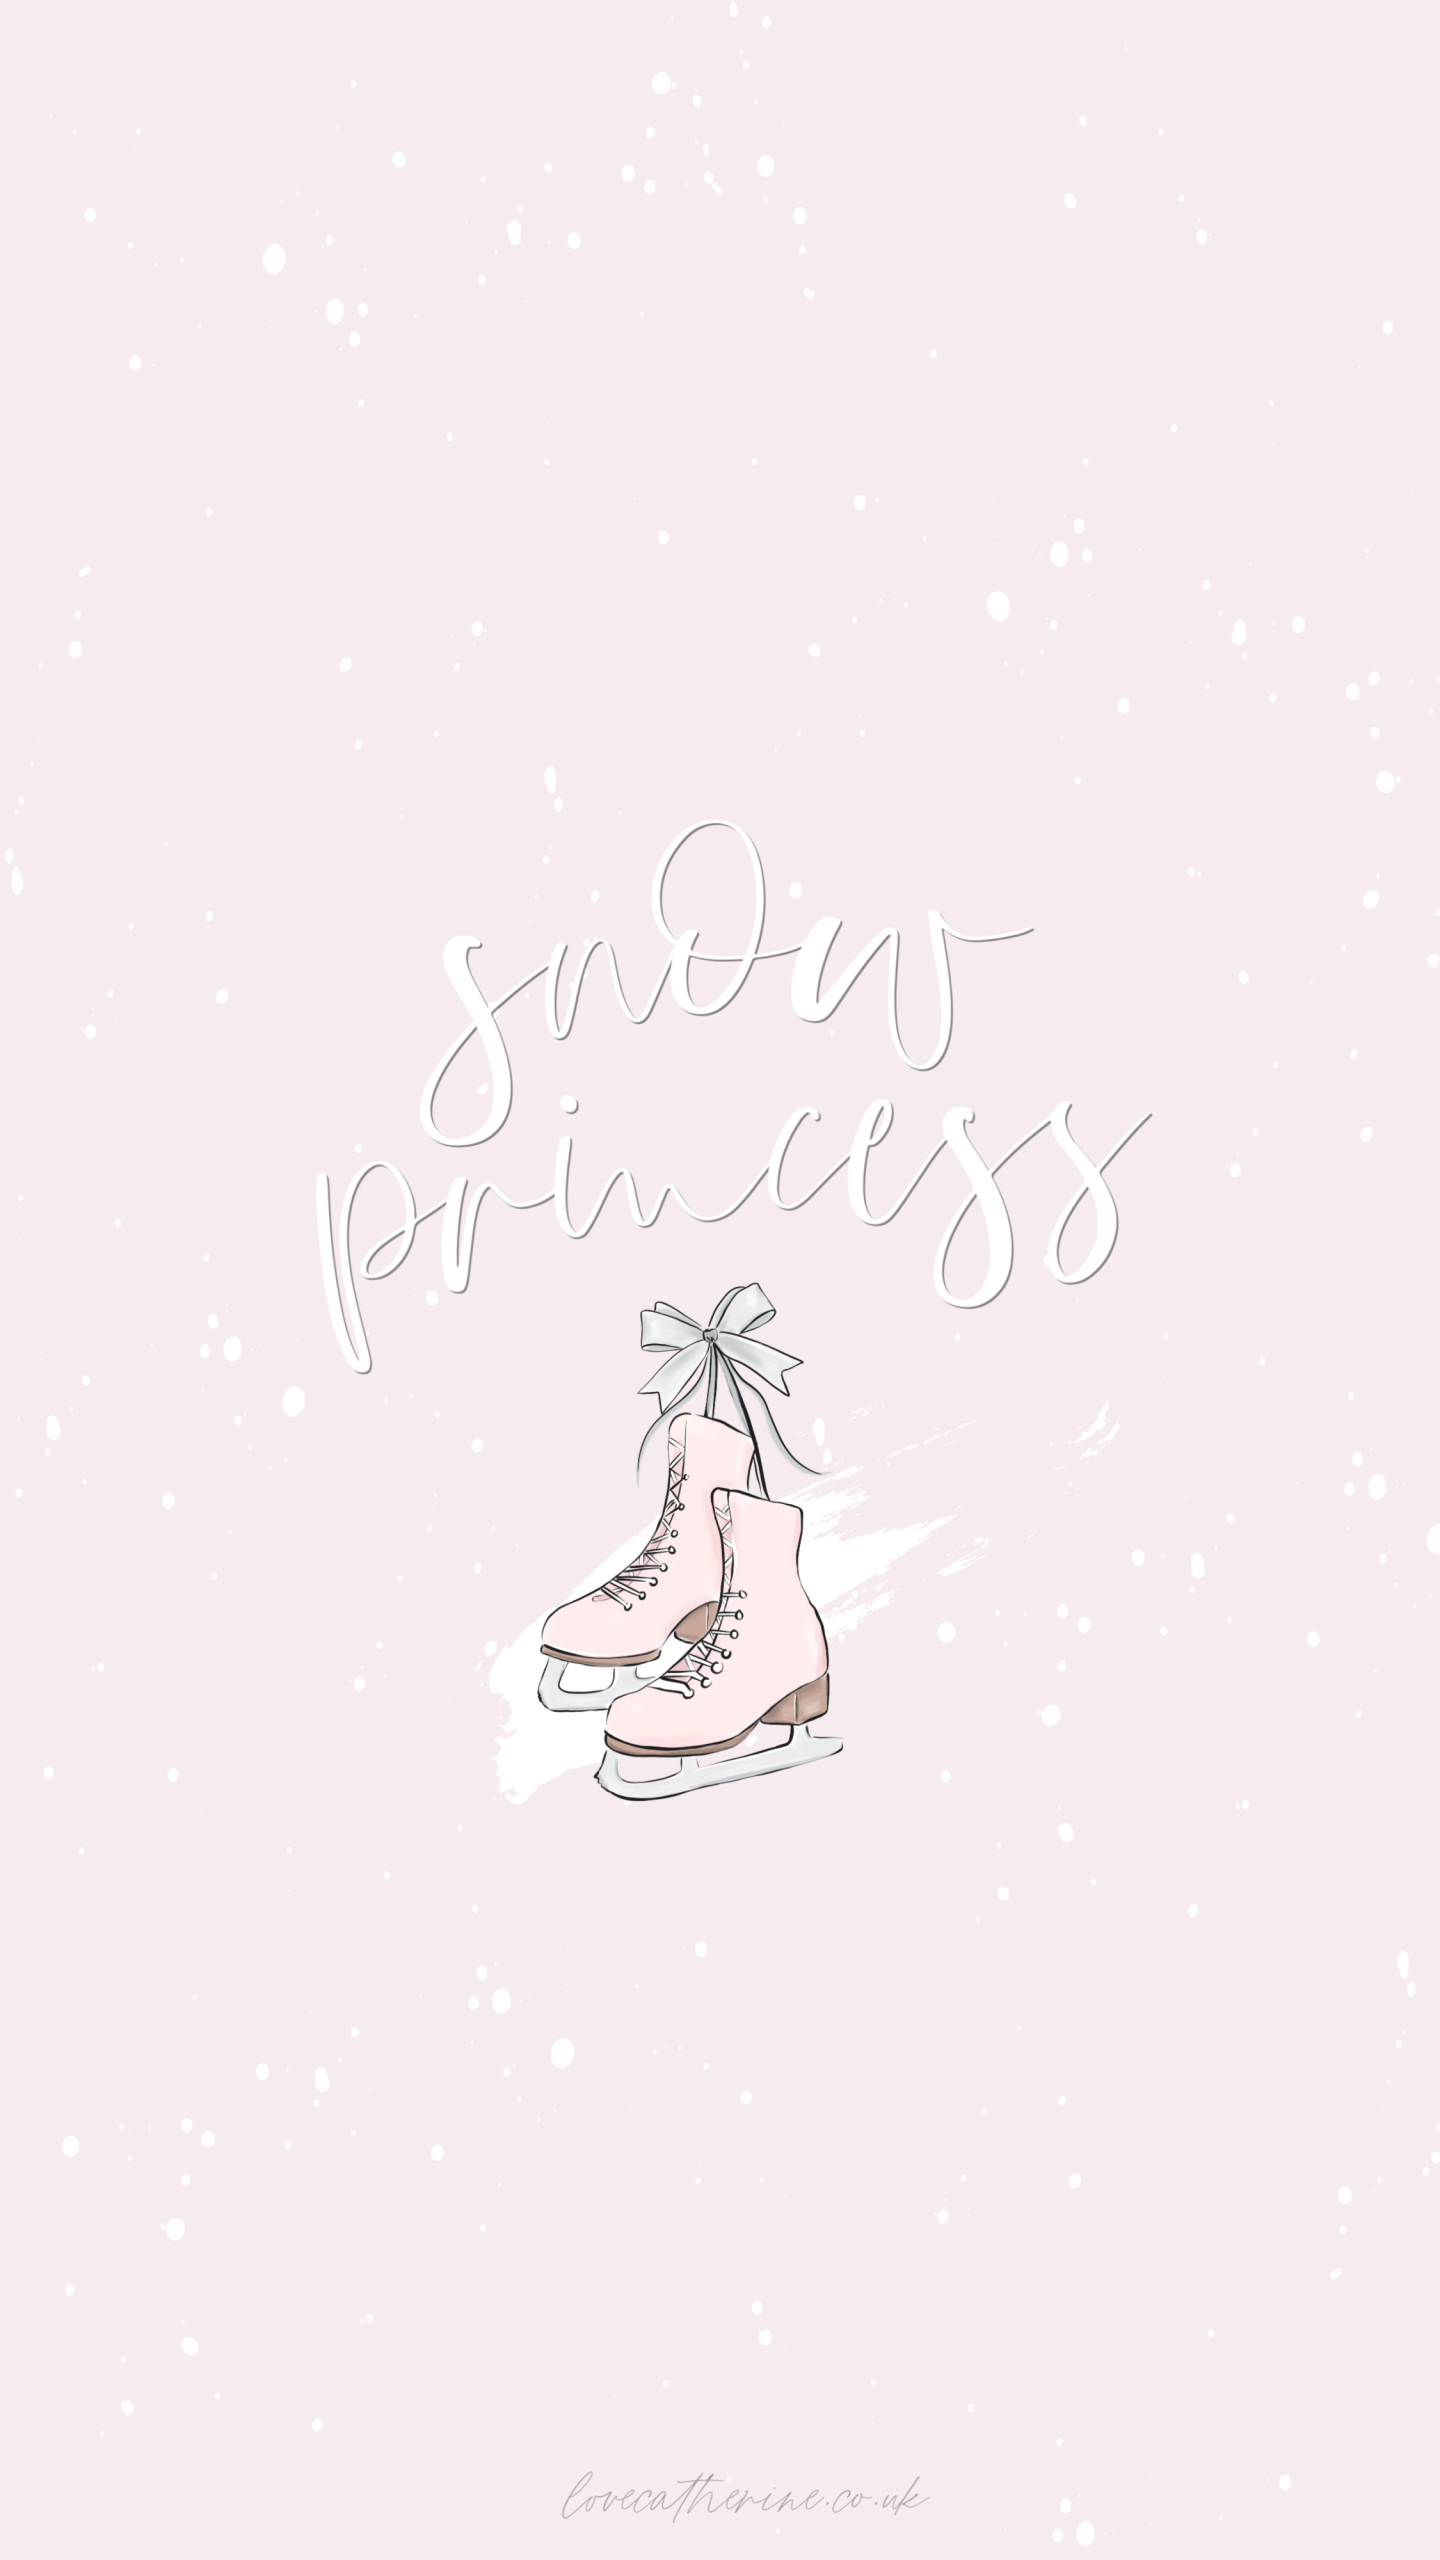 Free Cute & Girly Winter Phone Wallpaper For Christmas. Wallpaper iphone christmas, Christmas phone wallpaper, iPhone wallpaper girly